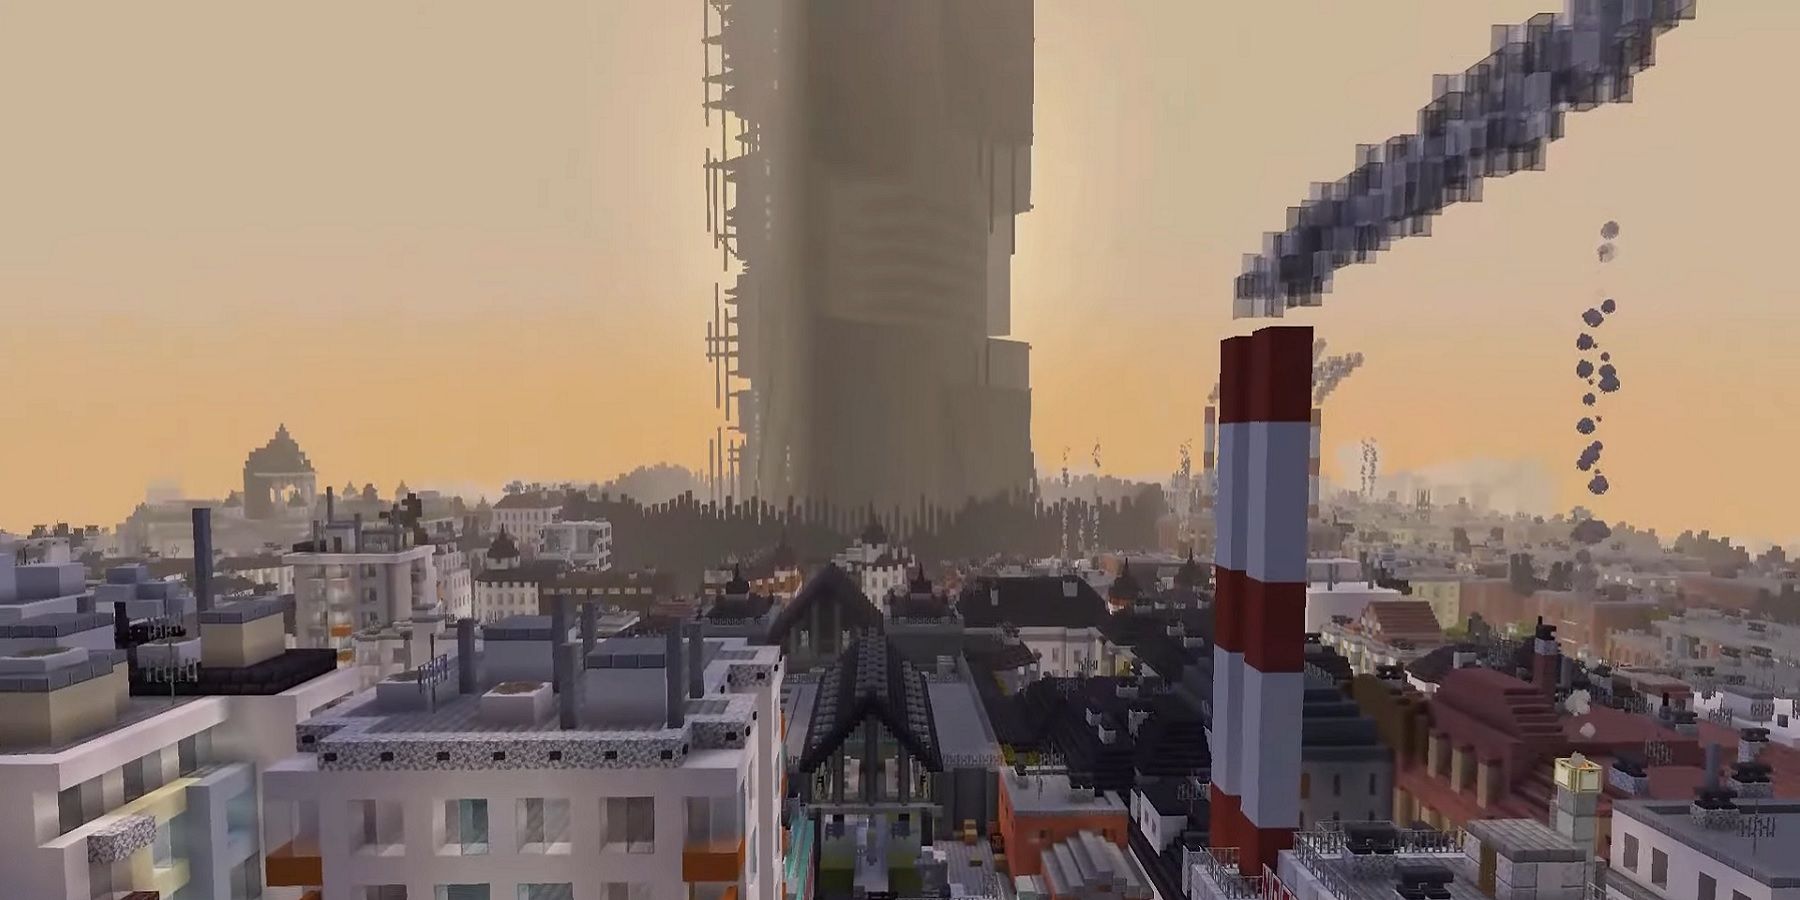 A screenshot from a Minecraft project which is a recreation of Half-Life 2, with the citadel in the background of the image.